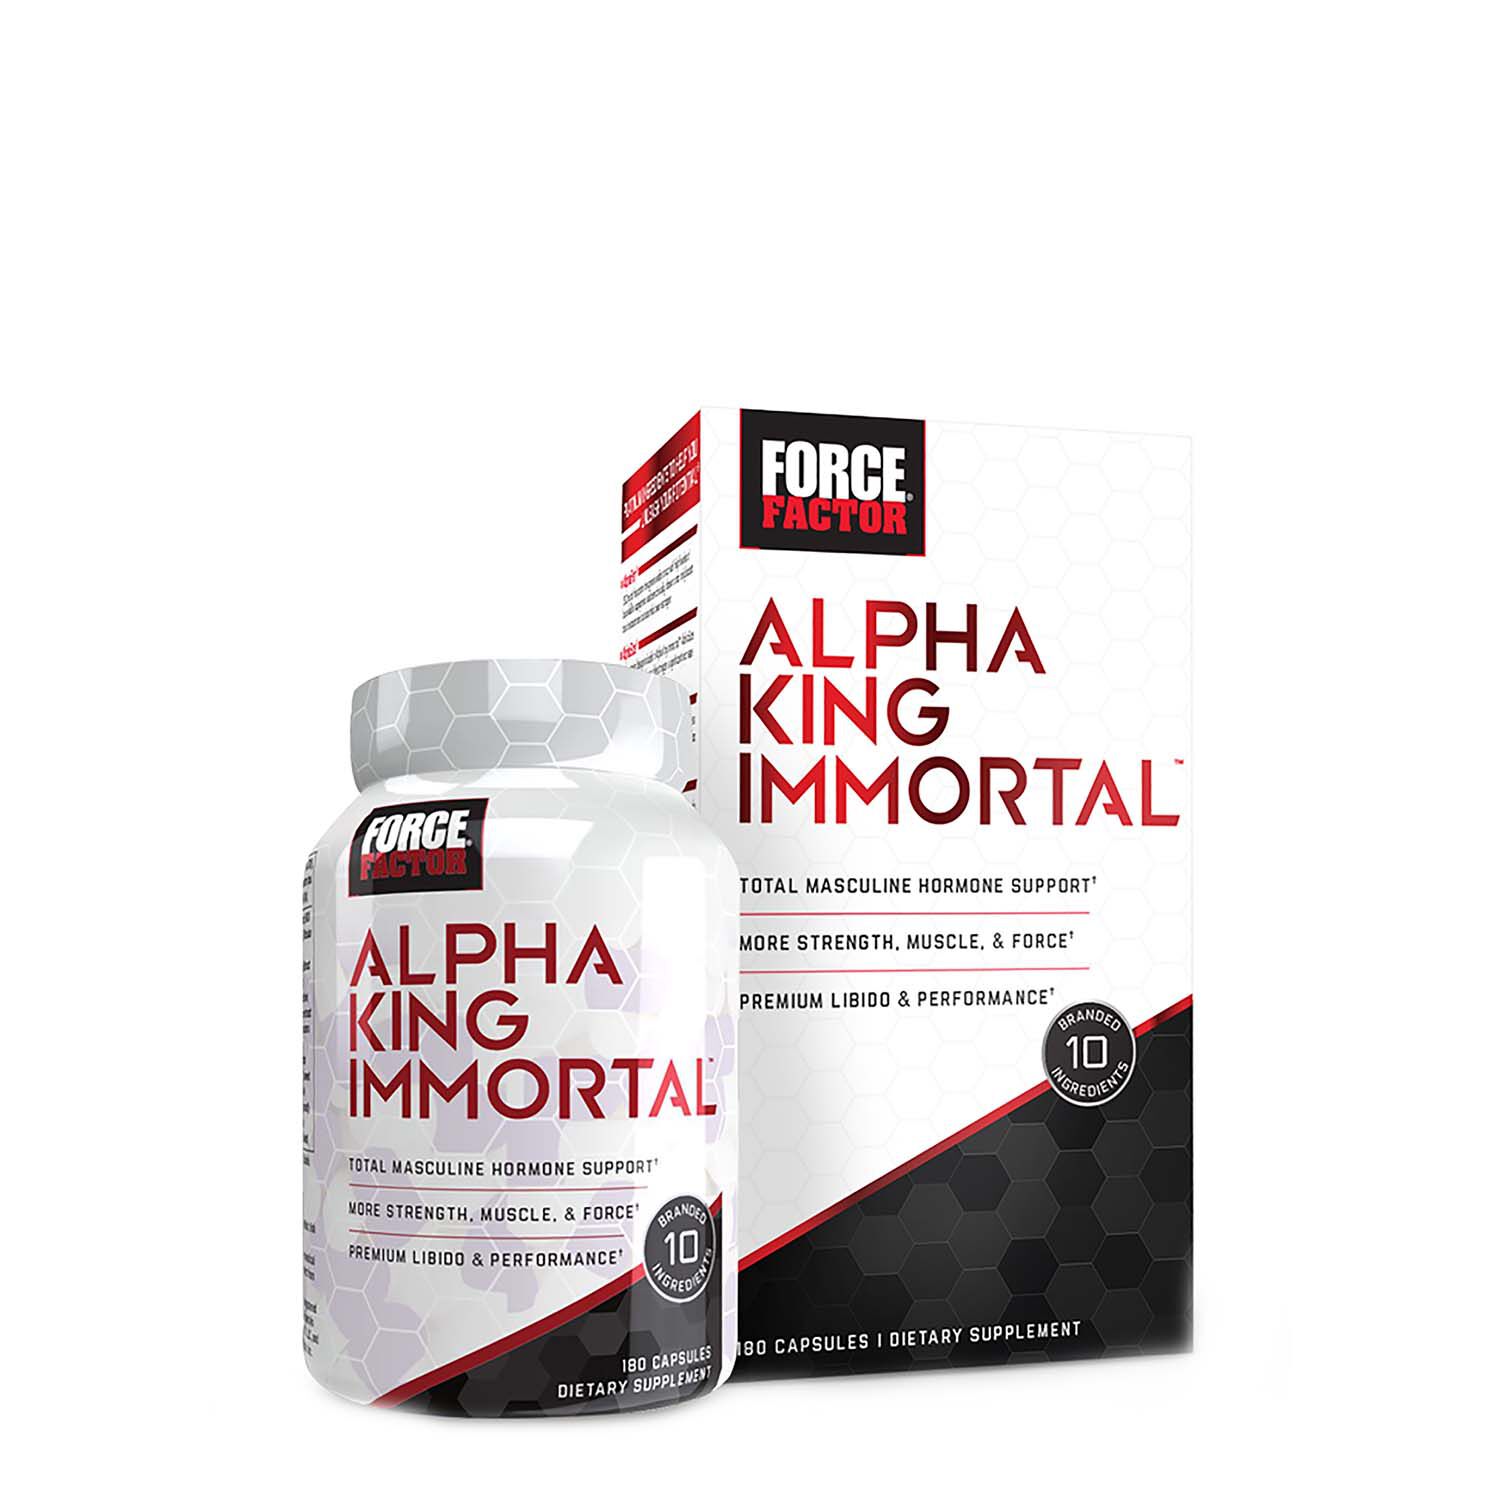 How To Make Vitality Pills  Daily Life of the Immortal King